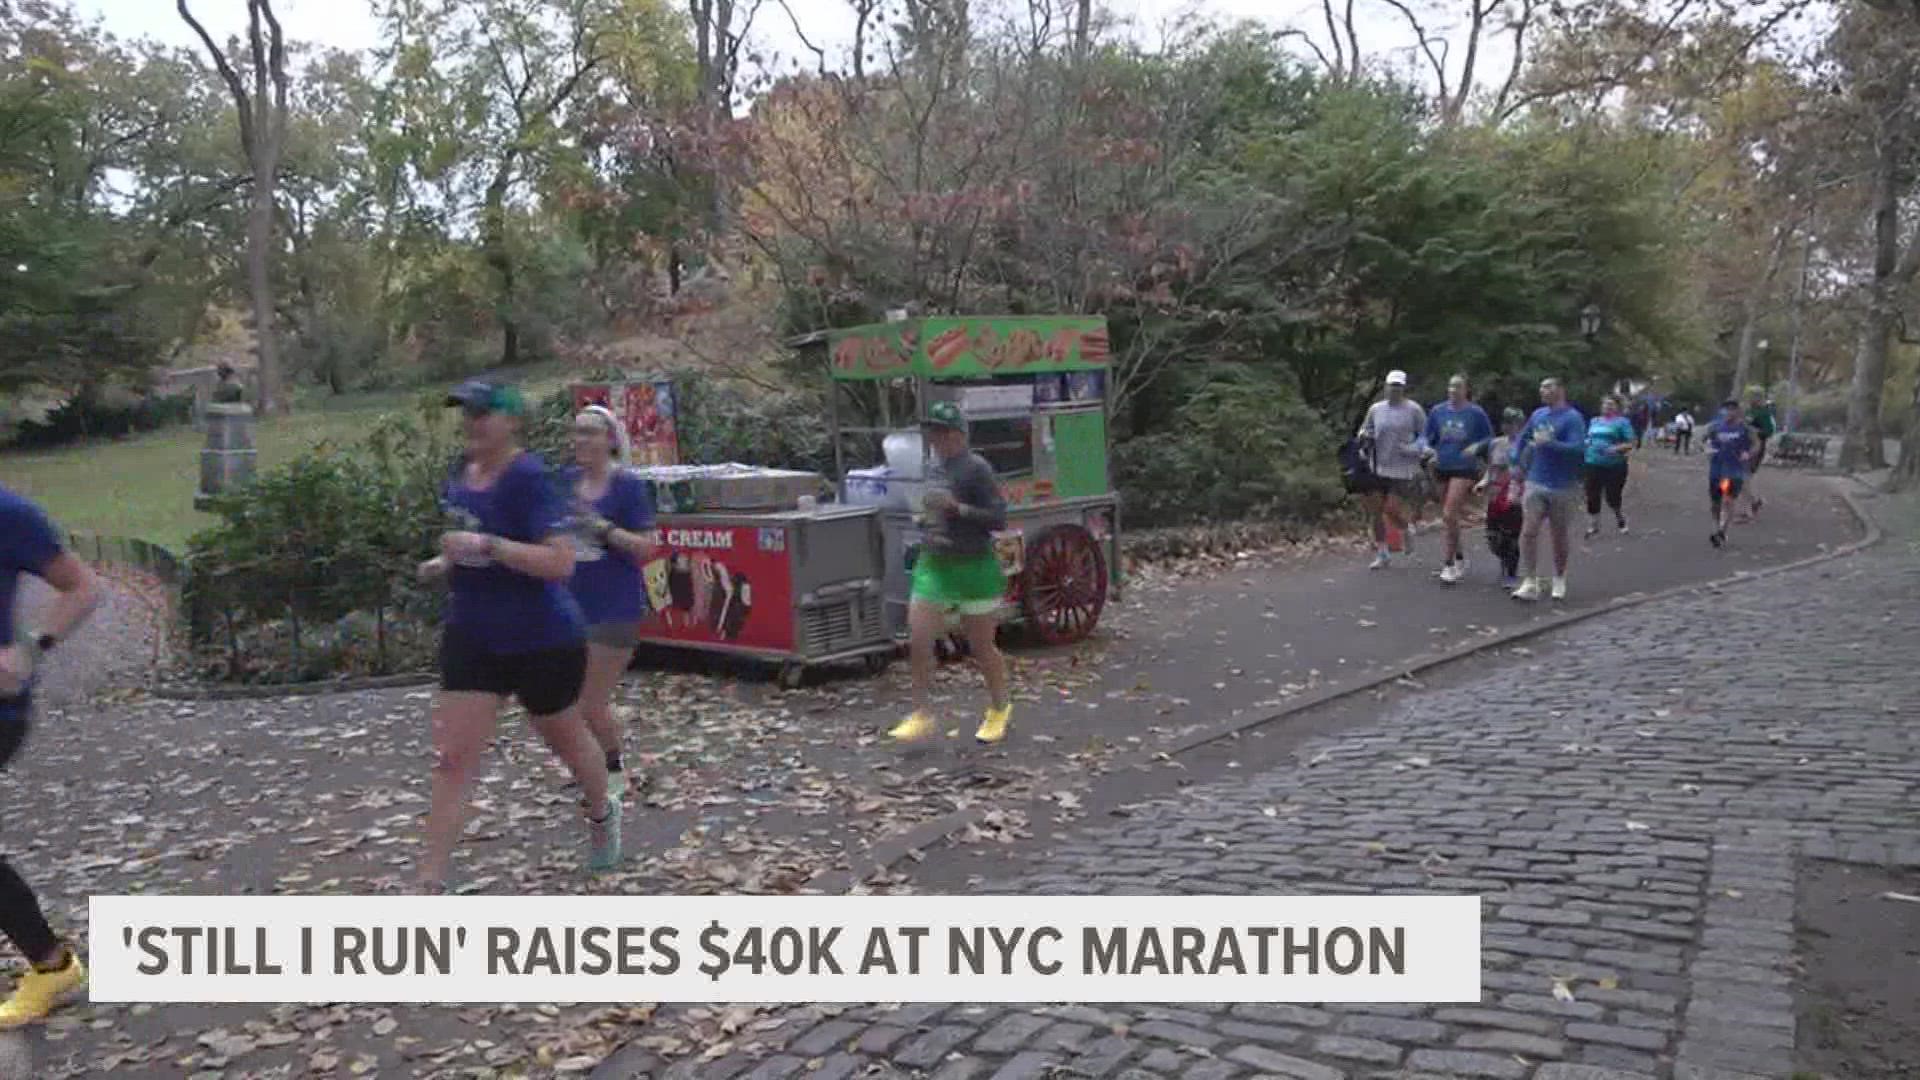 "Still I Run", a West Michigan-based nonprofit that promotes running for mental health, raised $40,000 as part of the New York City marathon.